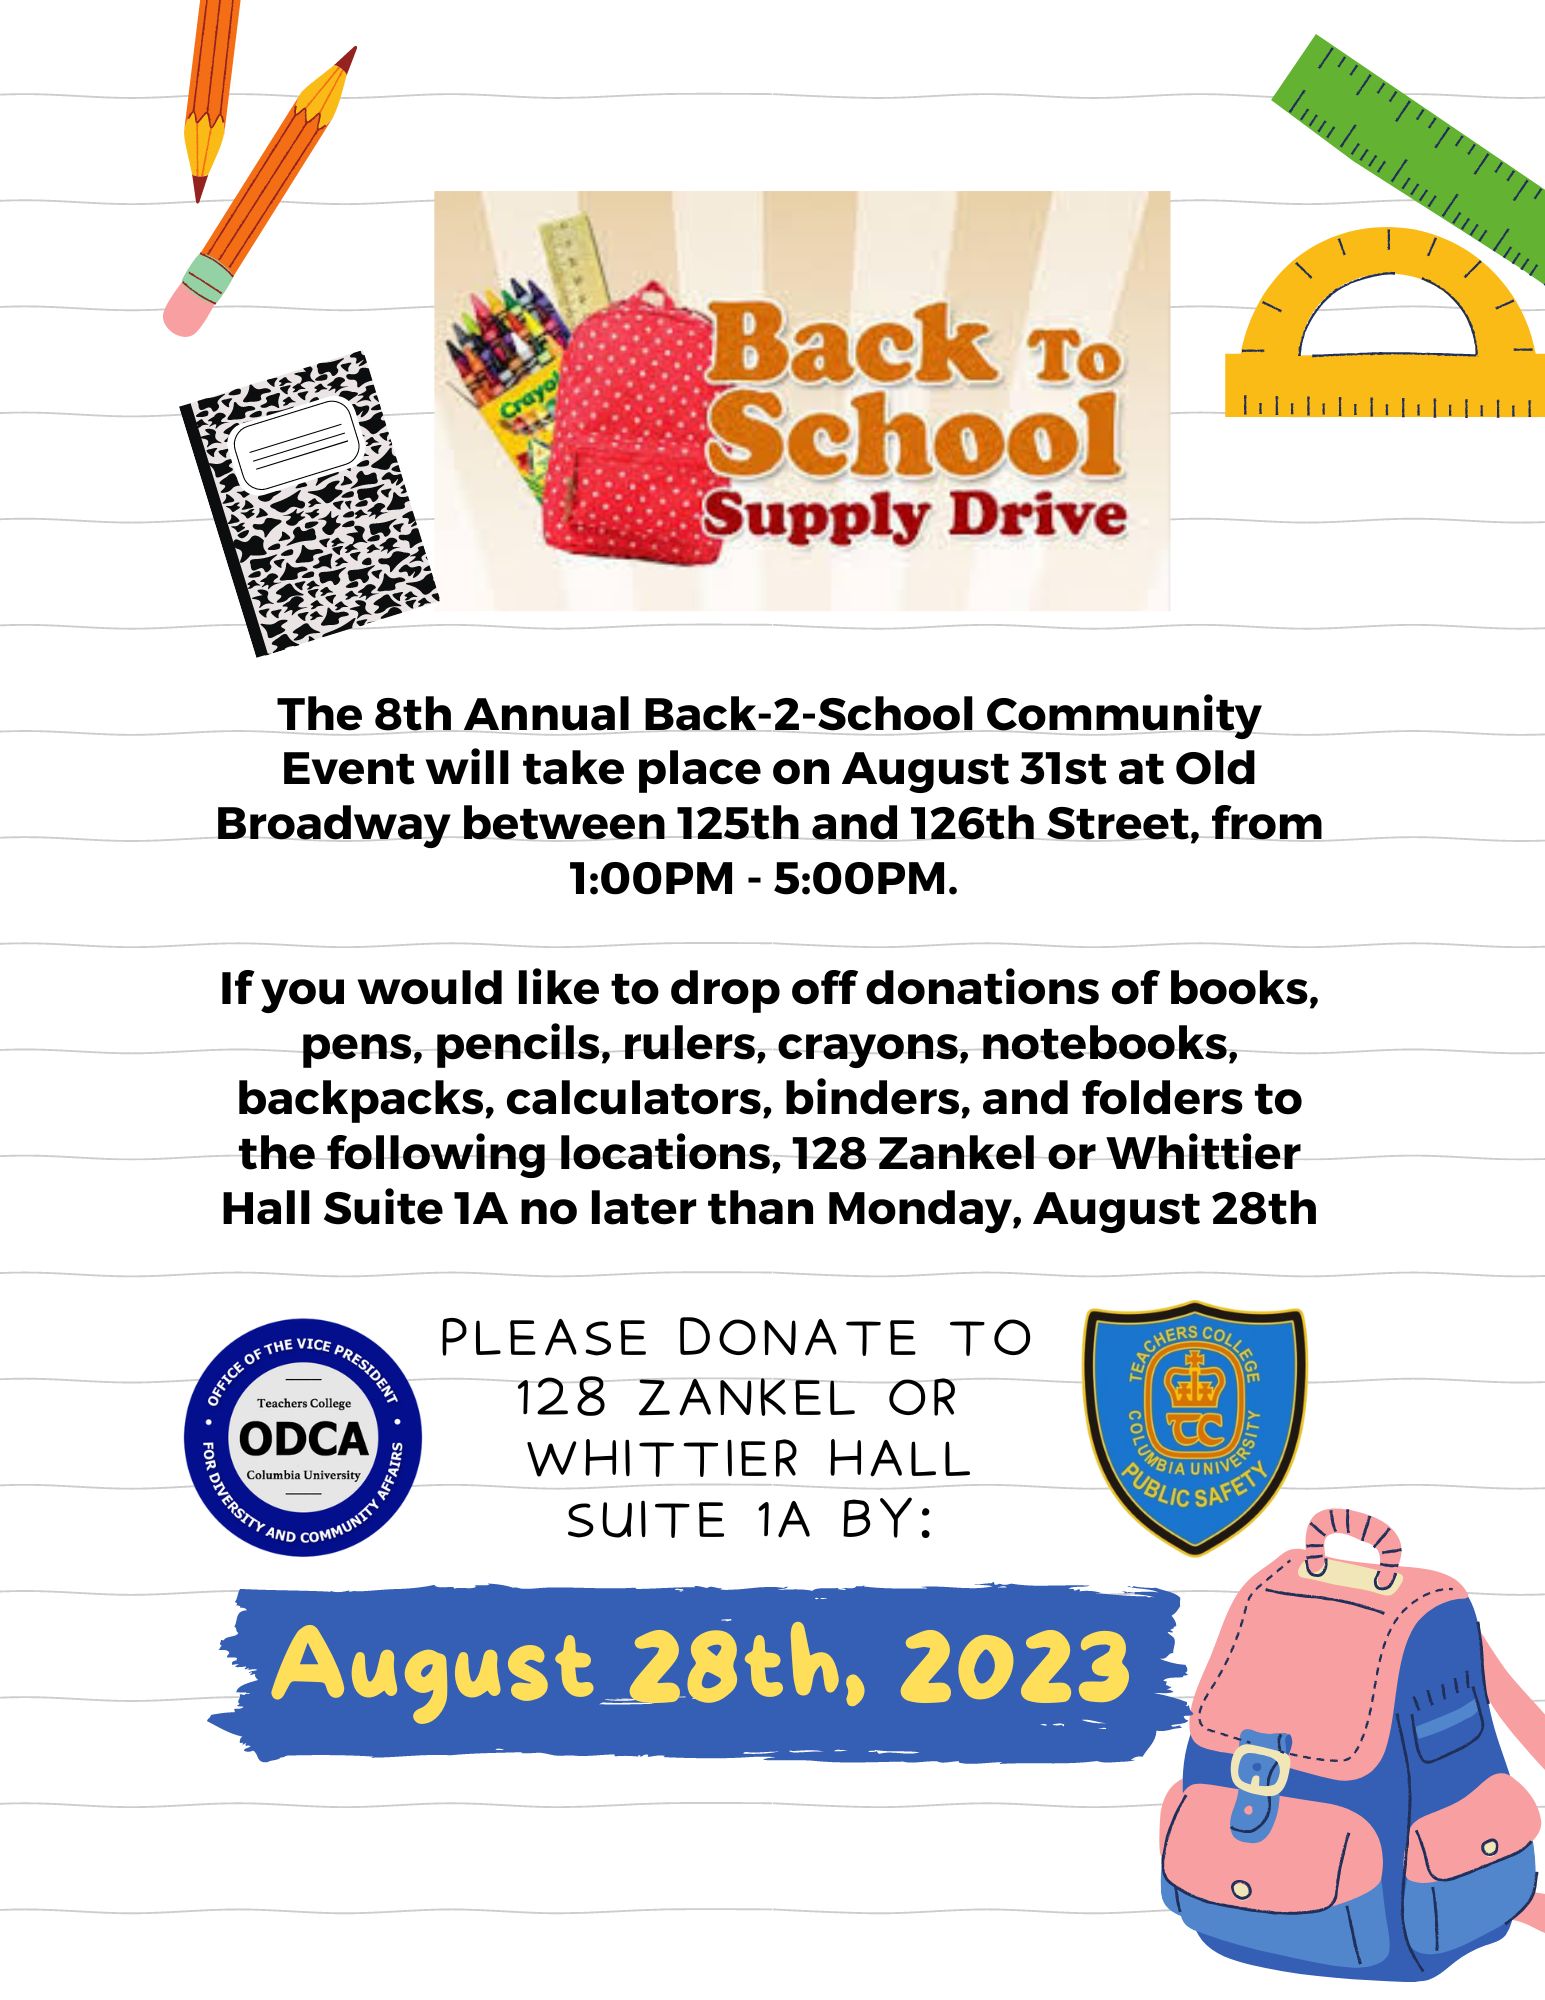 Event Flyer for 8th Annual Back-2-School Community Event; For more details, refer to the event descriptions below.